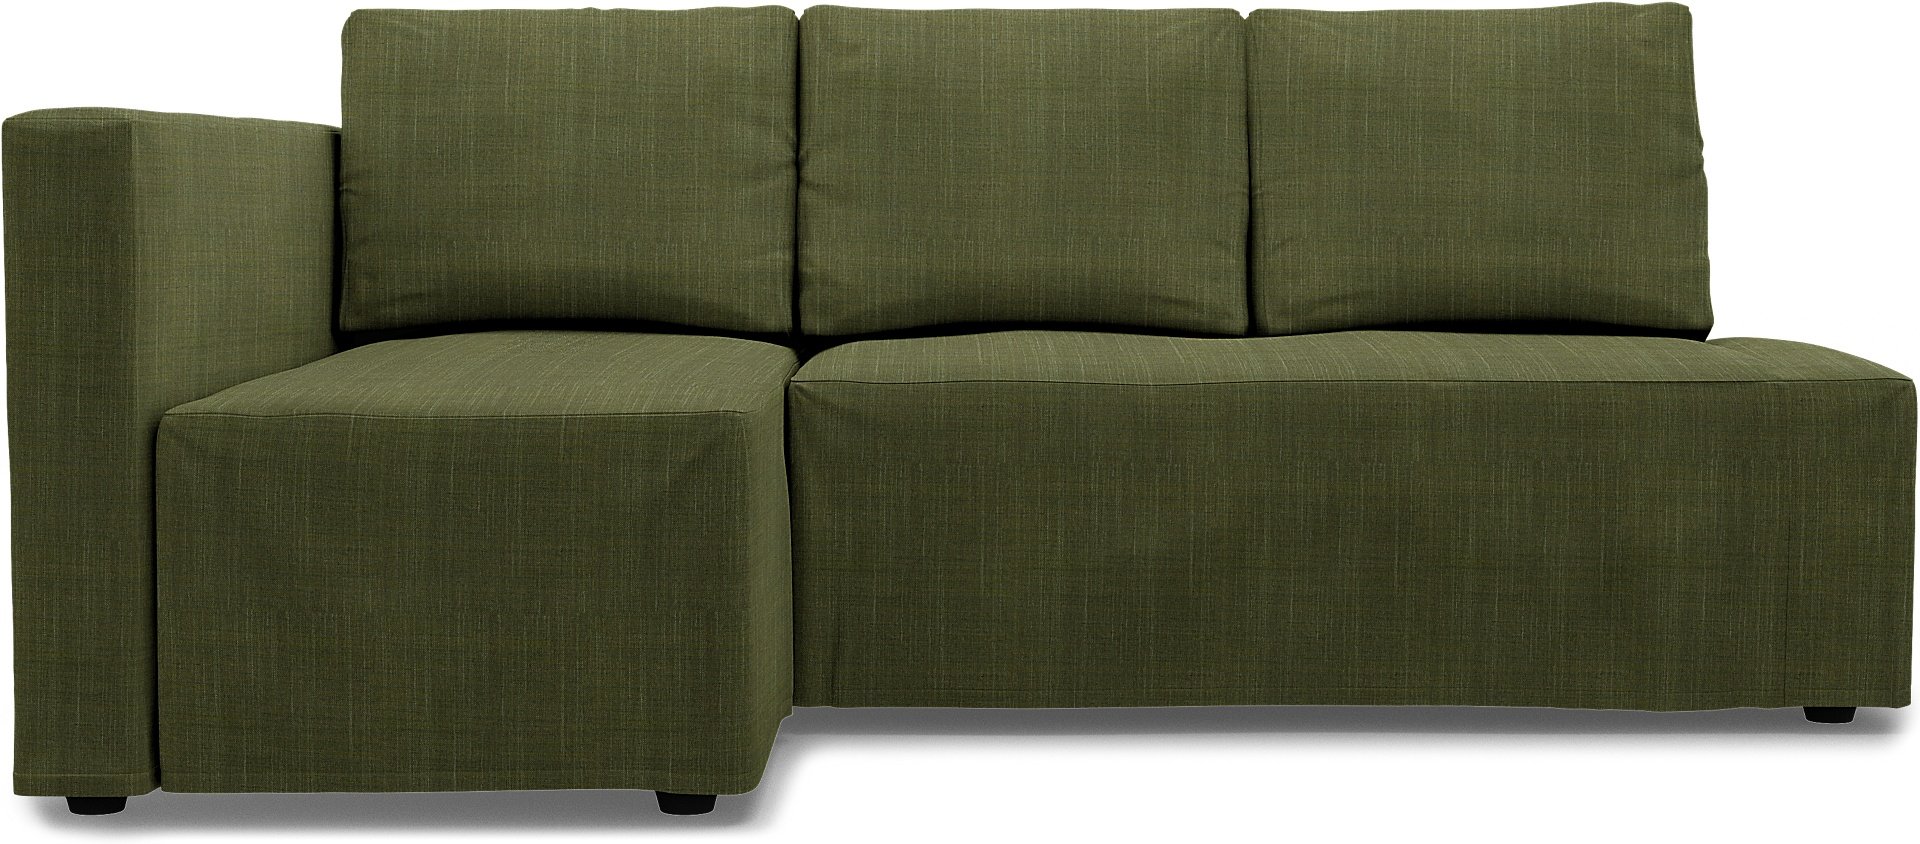 IKEA - Friheten Sofa Bed with Left Chaise Cover, Moss Green, Boucle & Texture - Bemz